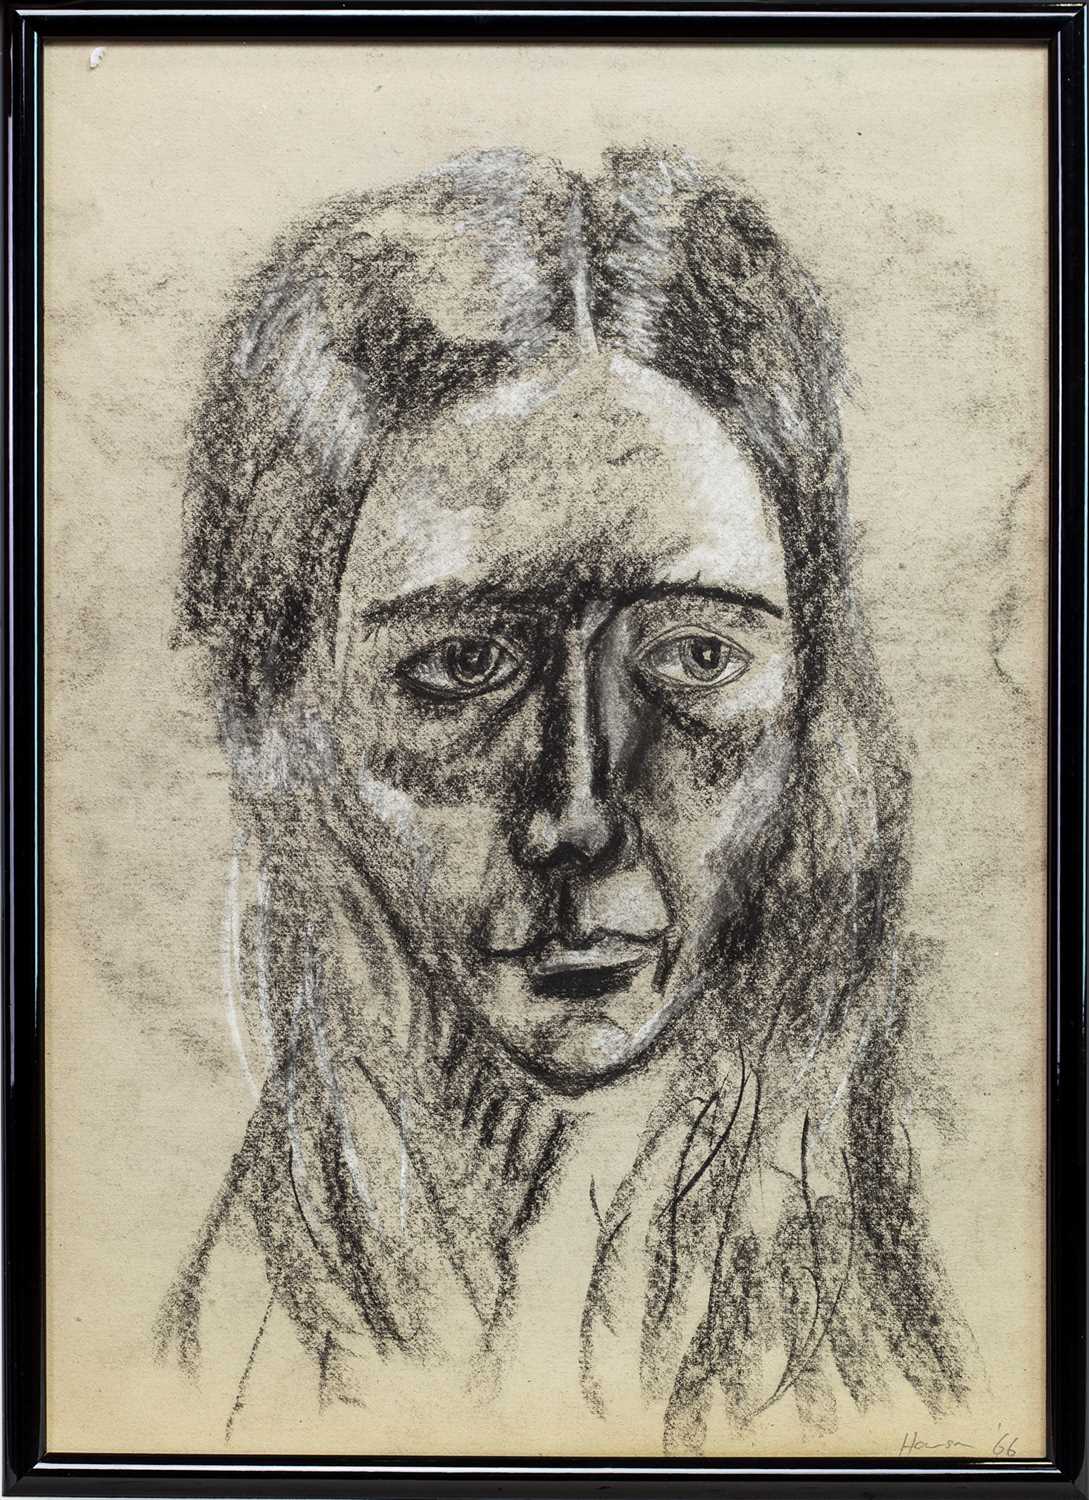 Lot 138 - A VERY EARLY PASTEL SKETCH OF A WOMAN, BY PETER HOWSON